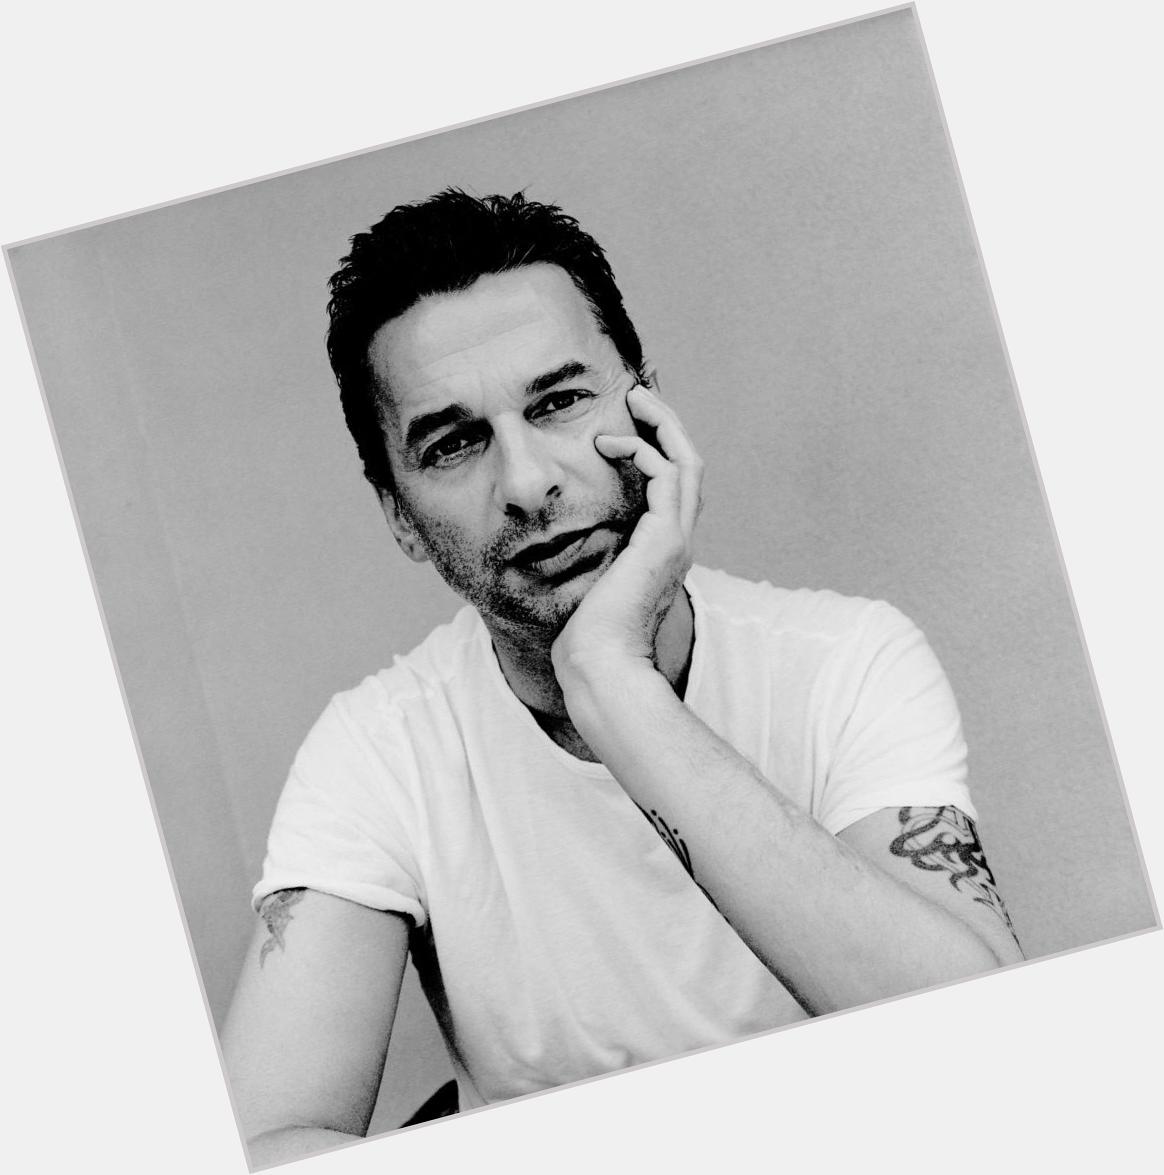 HAPPY 53rd BIRTHDAY to the legend that is Dave Gahan. Greatest singer from the greatest band ever!! 